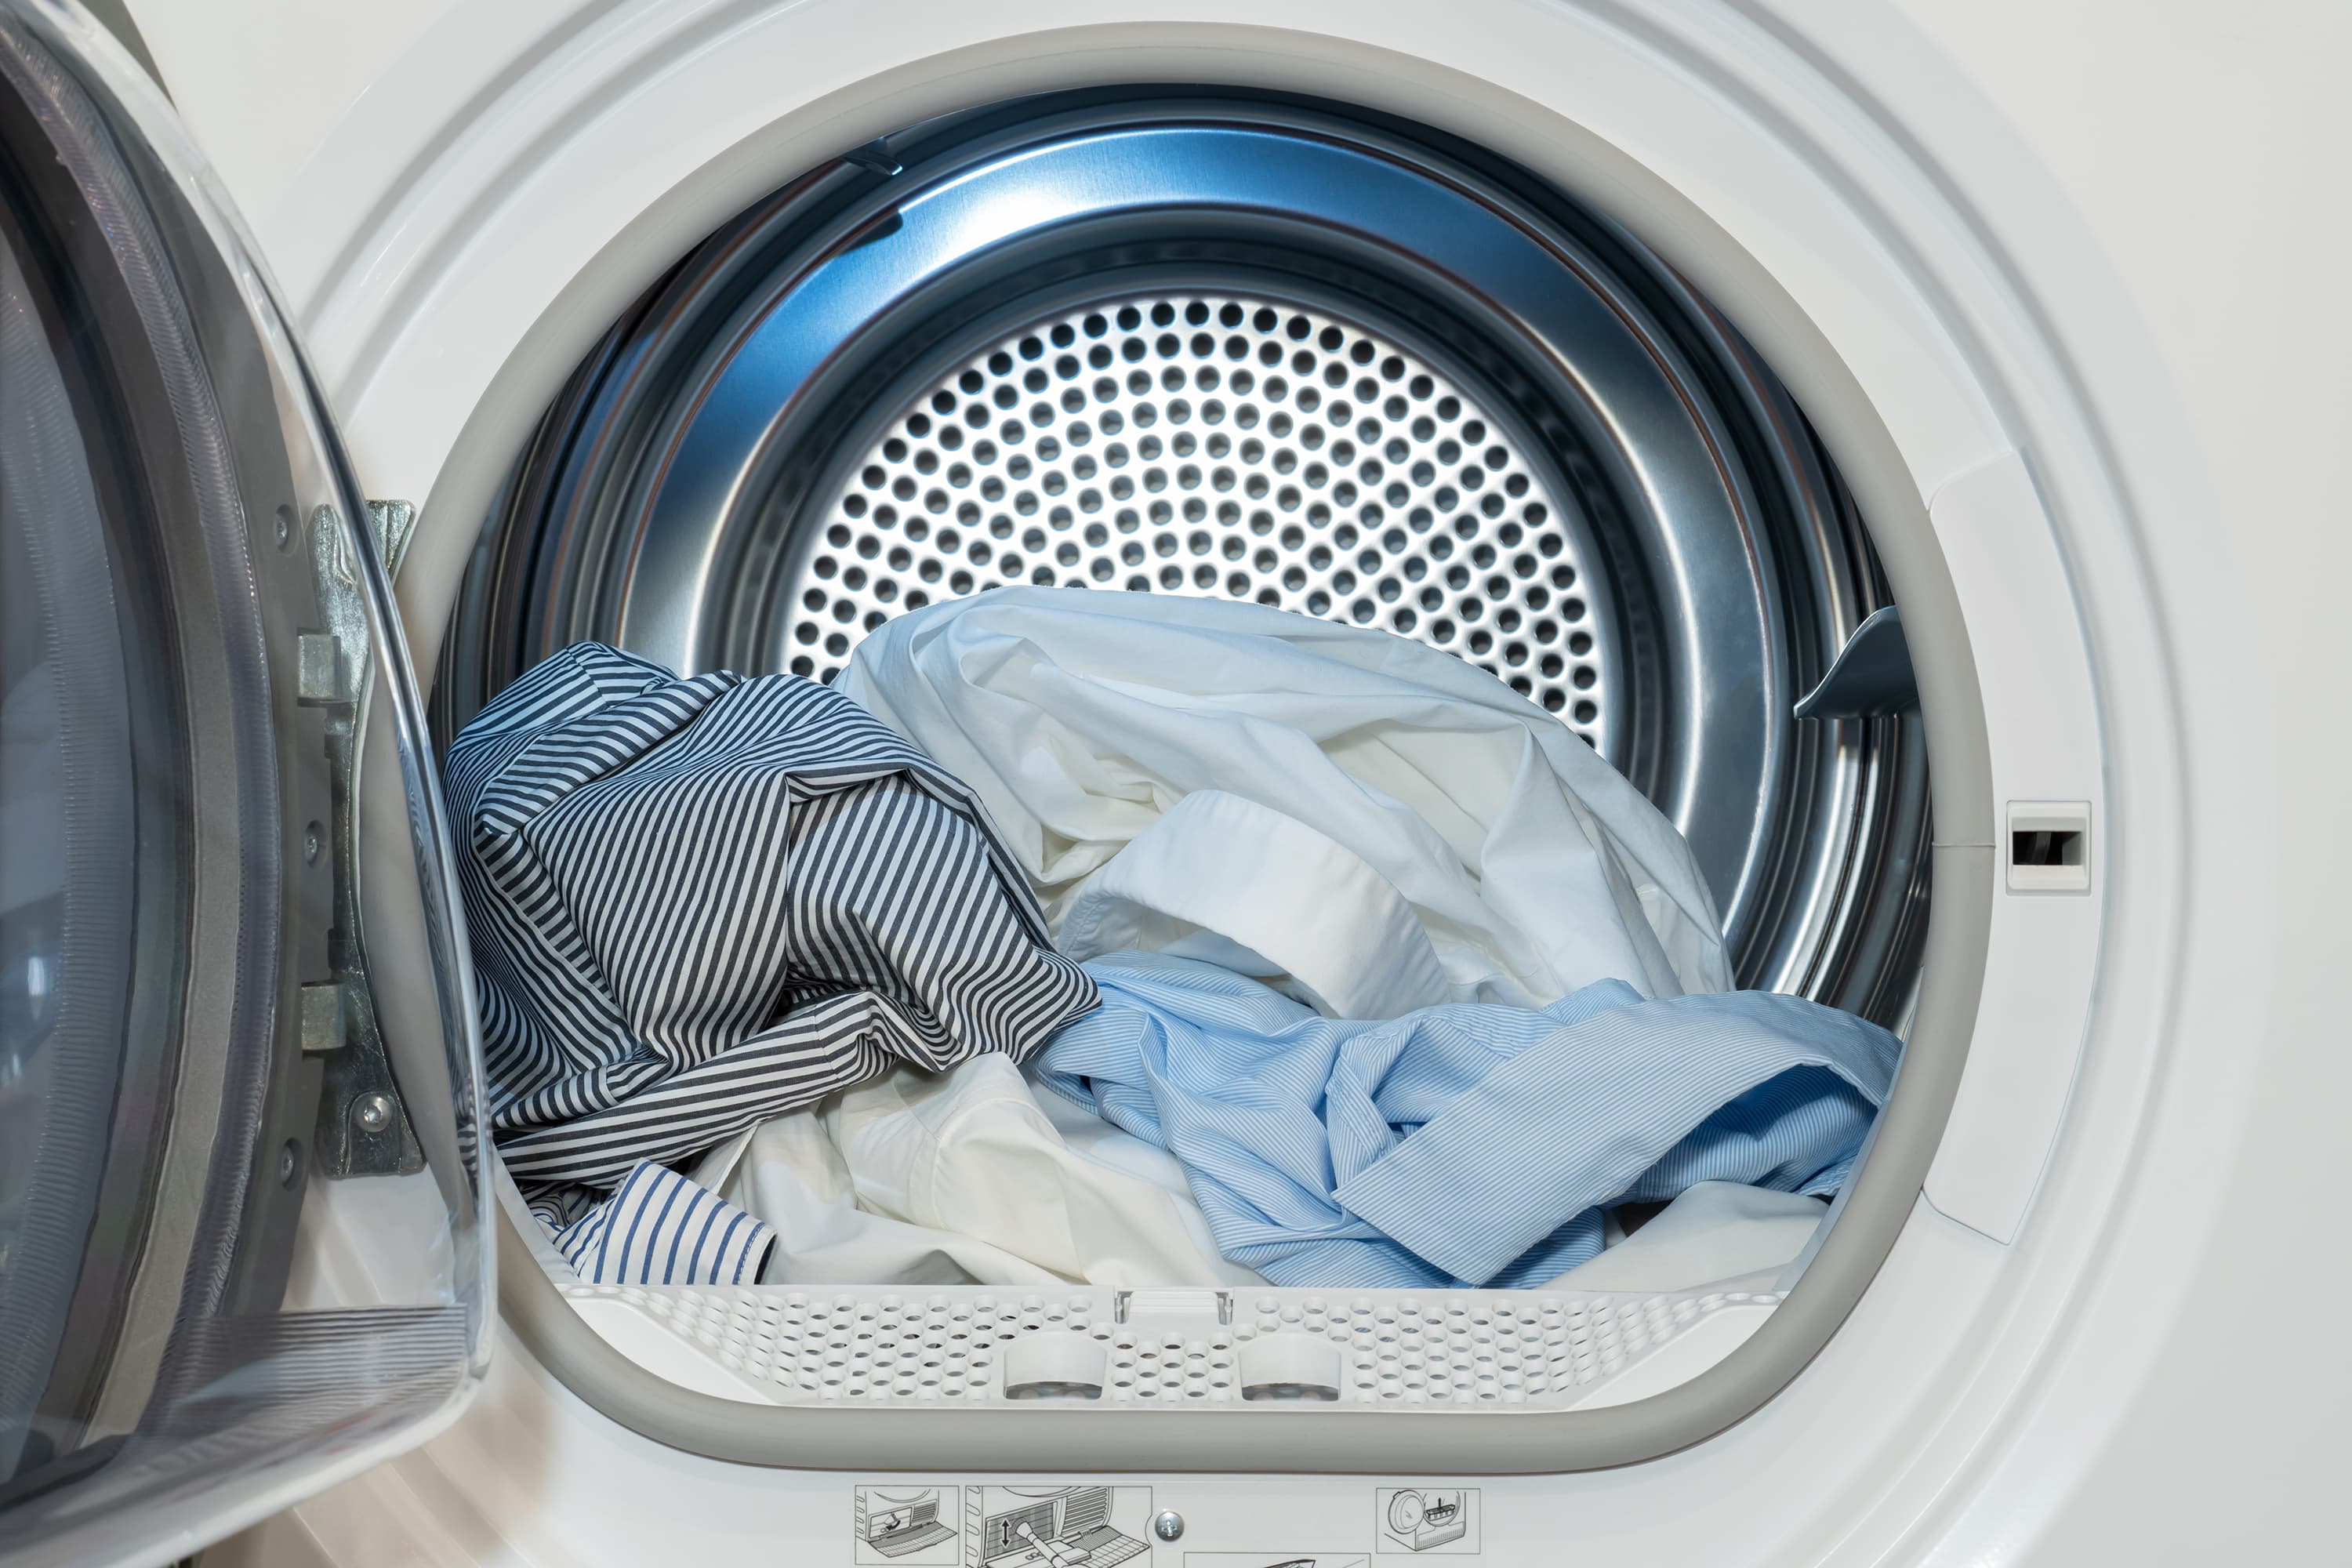 How To Get Lint Off Clothes In Dryer